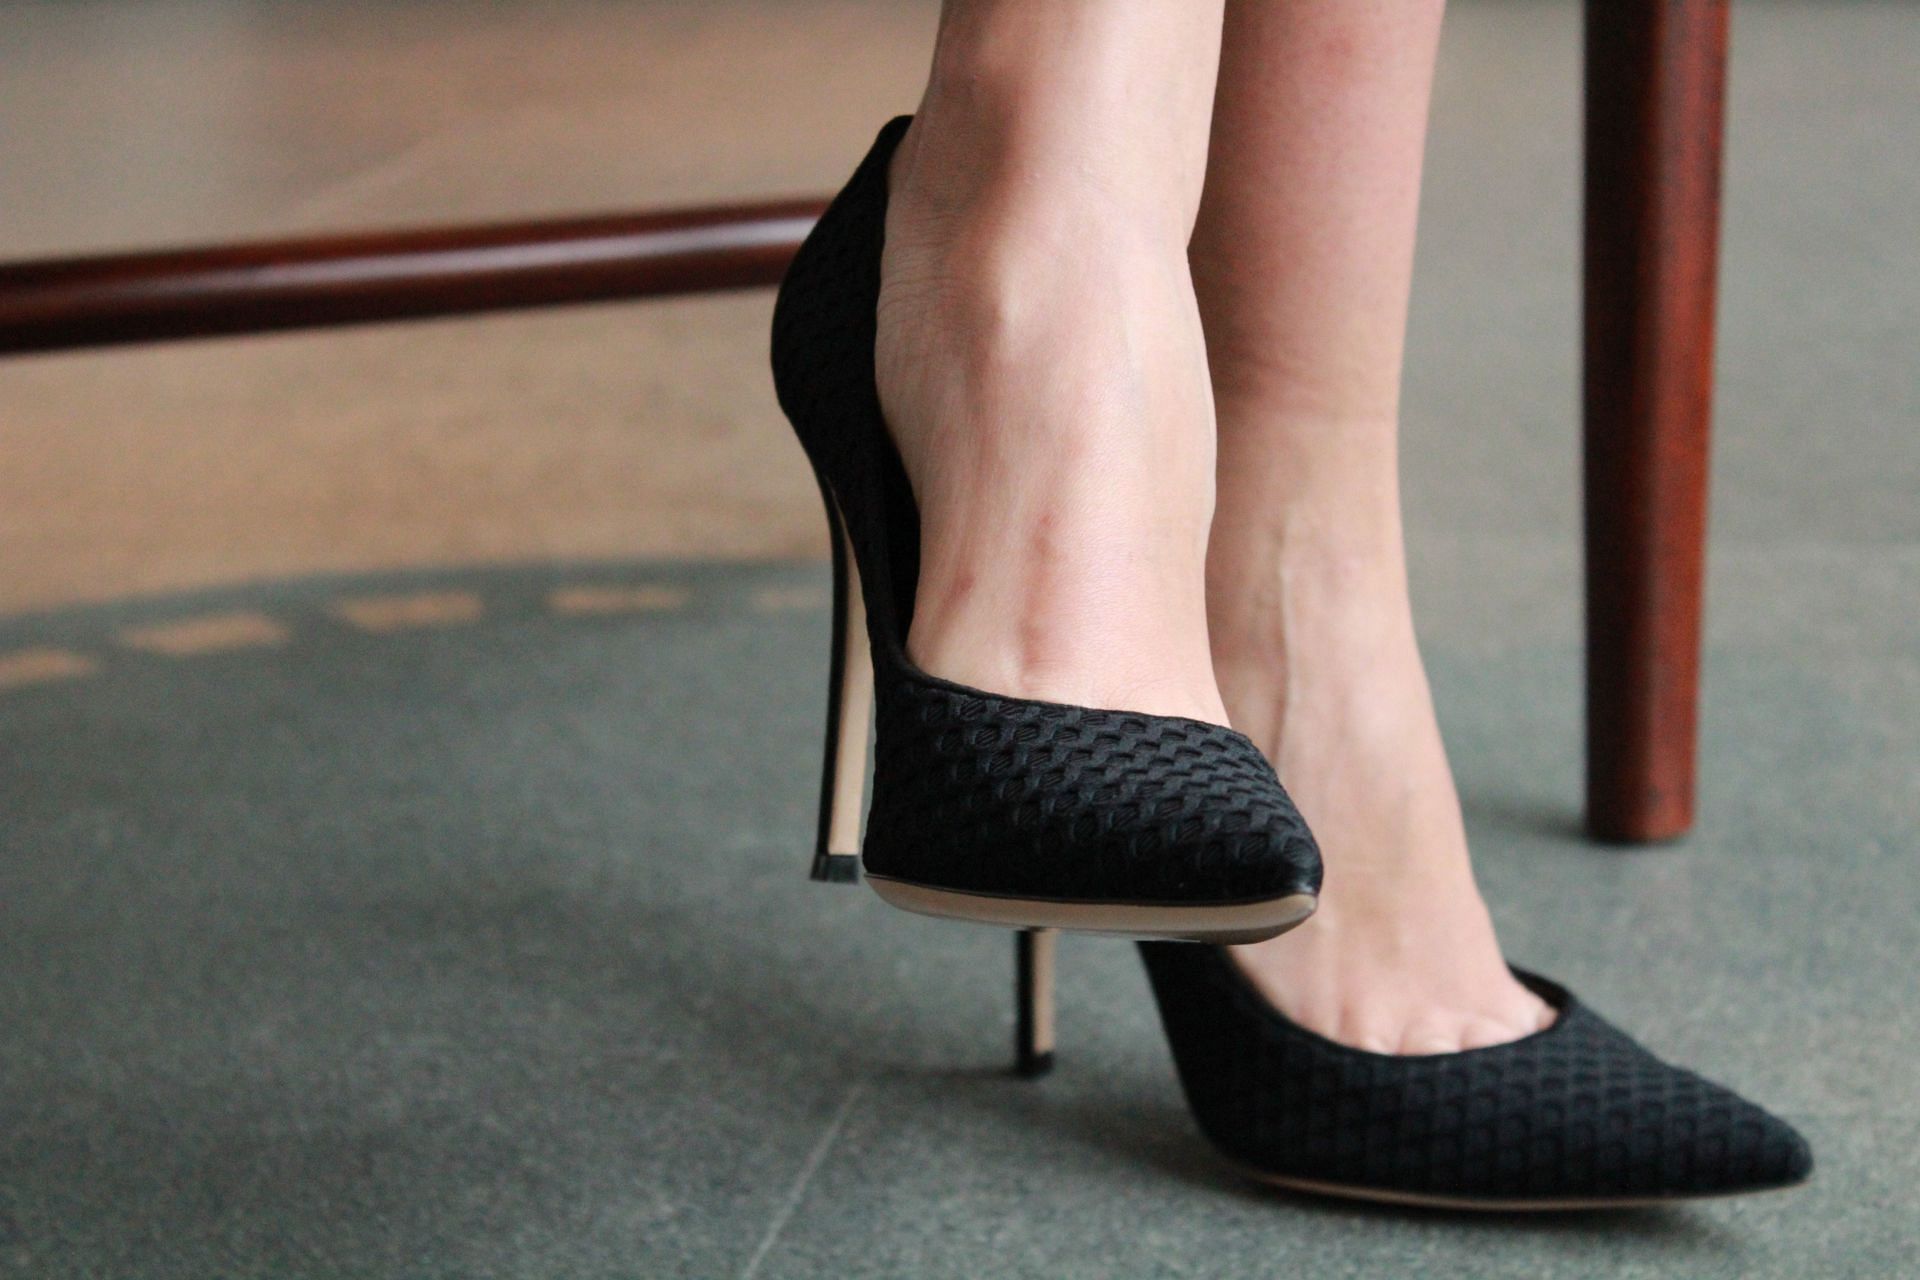 Wearing high heels can also cause sciatic flare-ups. (Image via Unsplash/ Andrea Pepero)